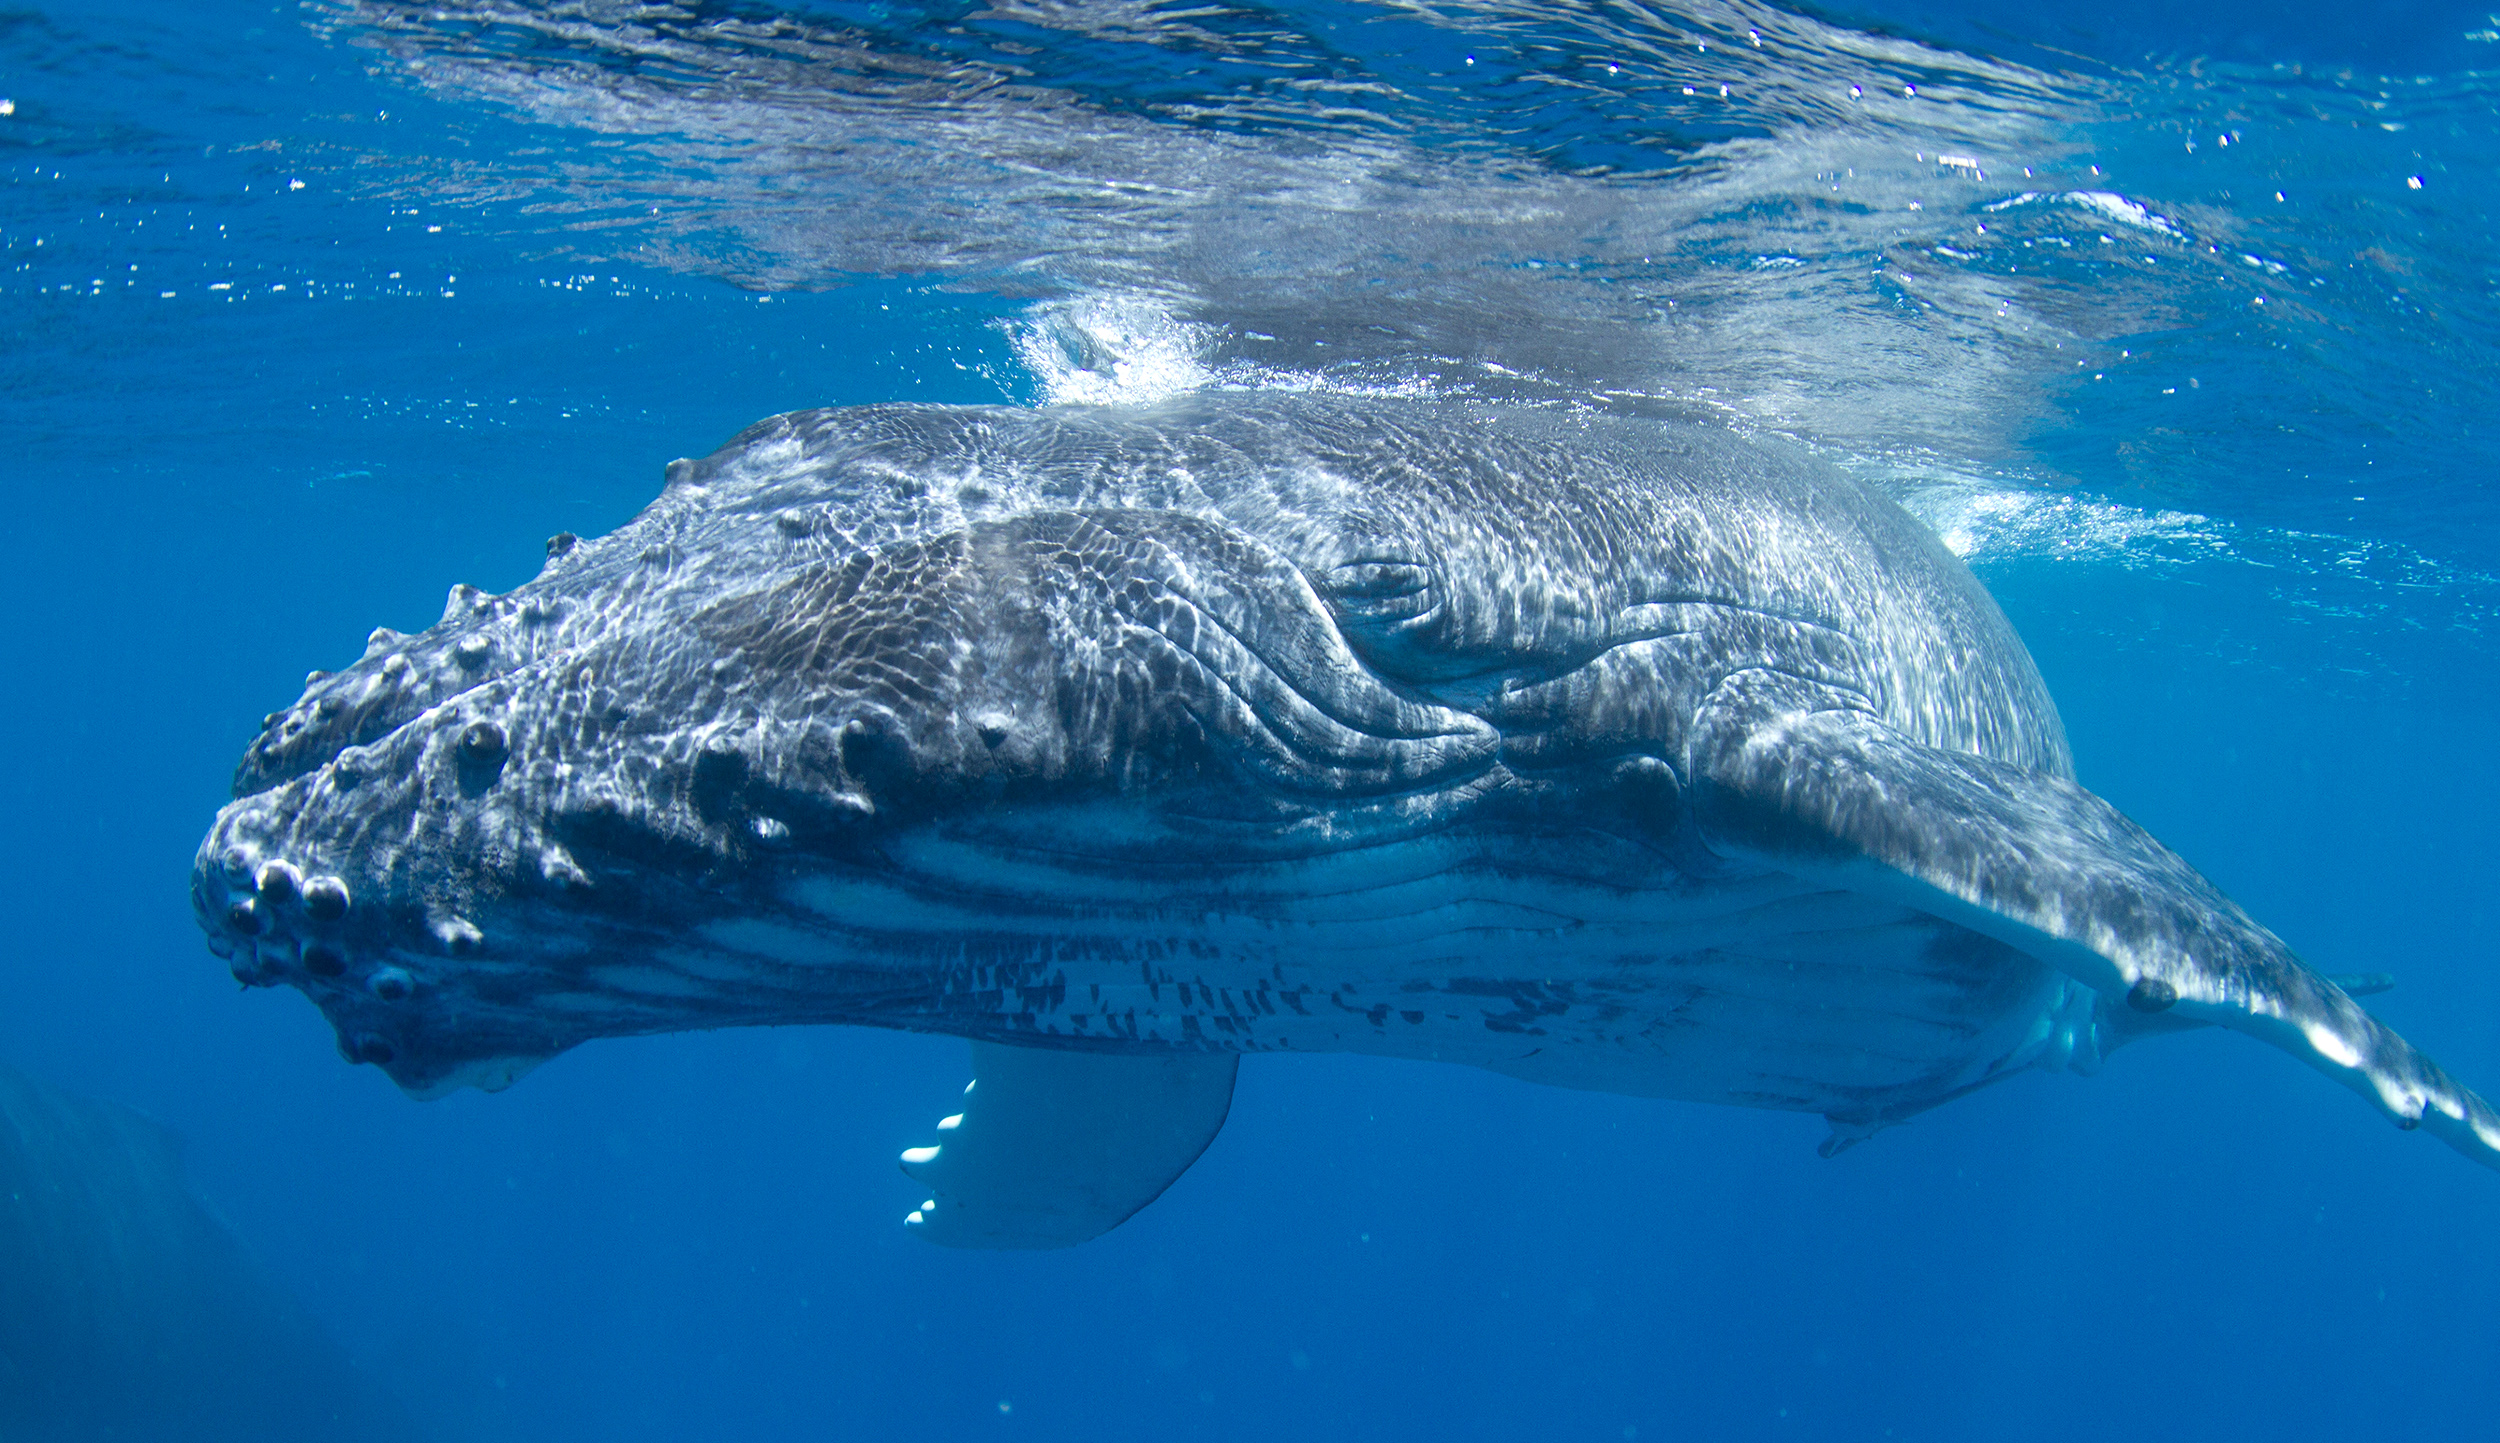 Featuring a mix of stunning 3D imagery, underwater splendor and scientific exploration, the film asks the compelling question: What might life be like from a humpback’s point of view?  